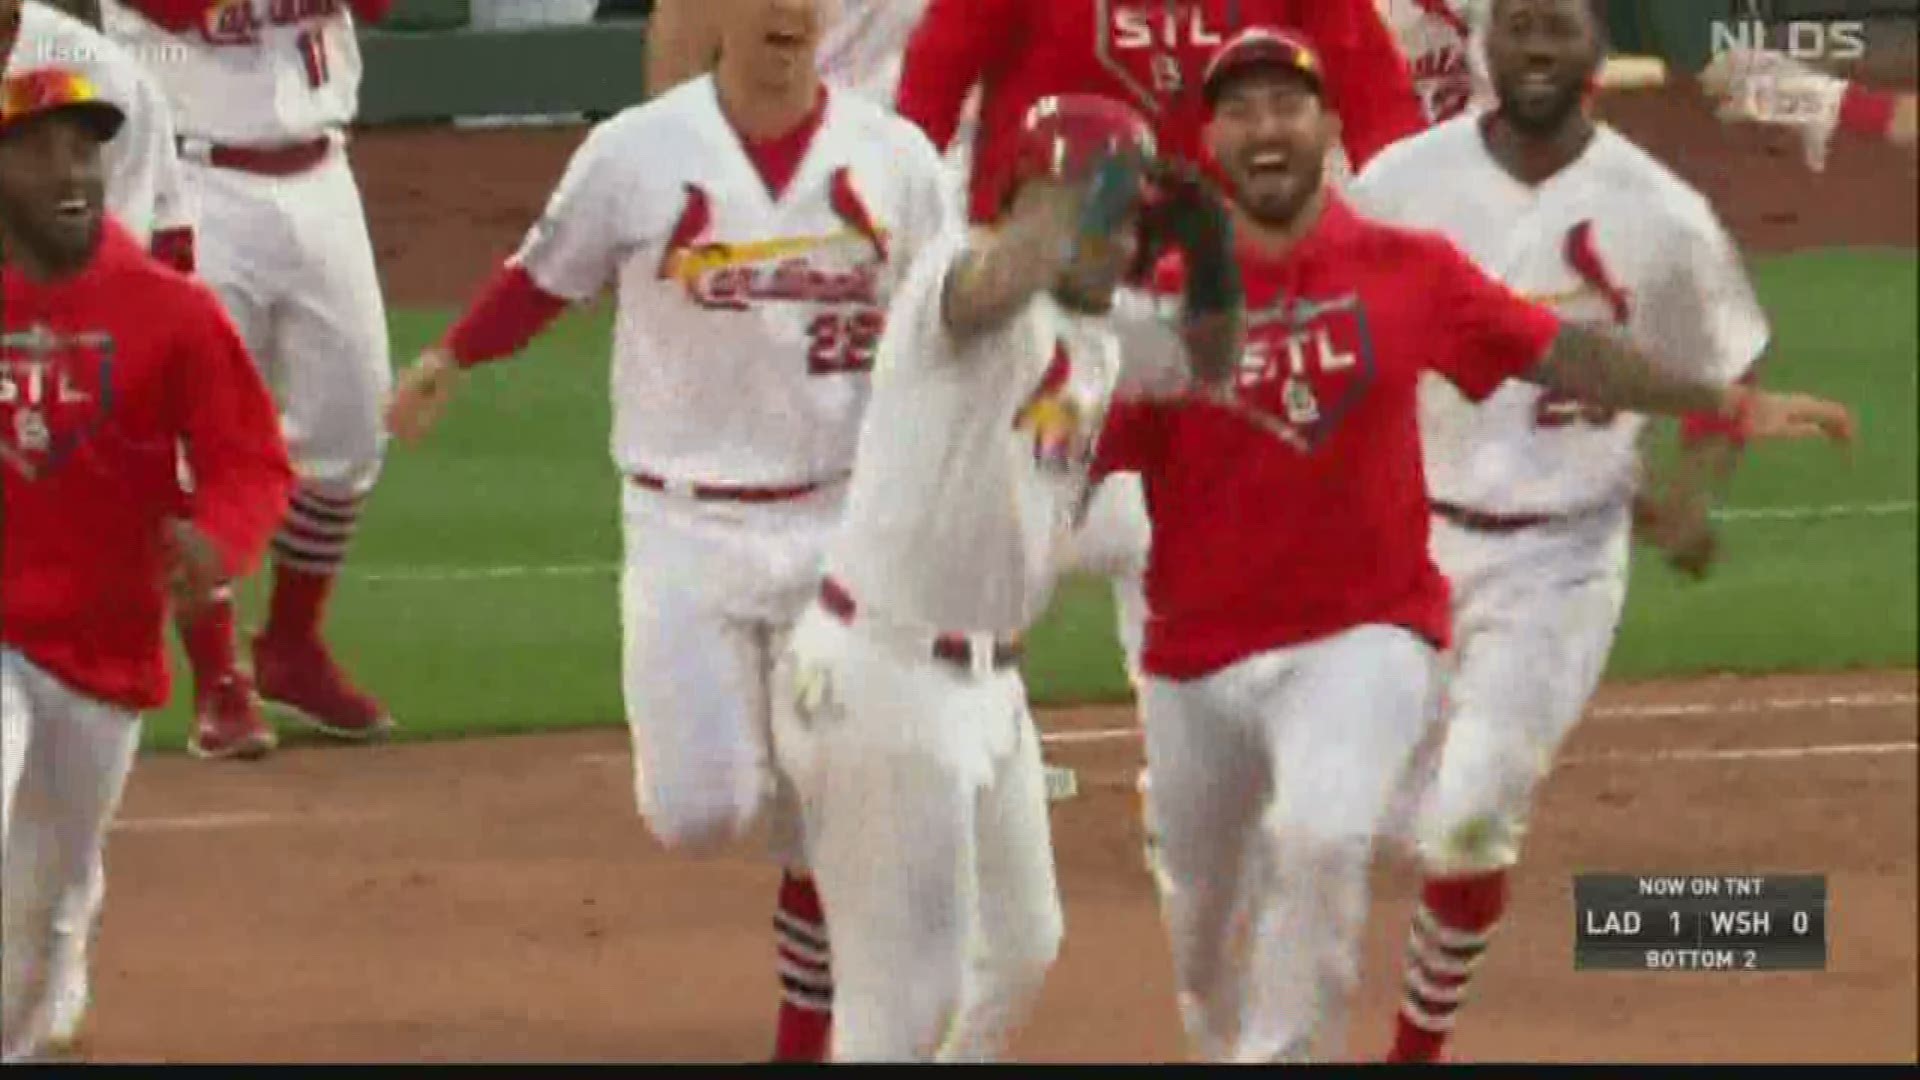 Cardinals Game 5 set for 4:02 Wednesday afternoon